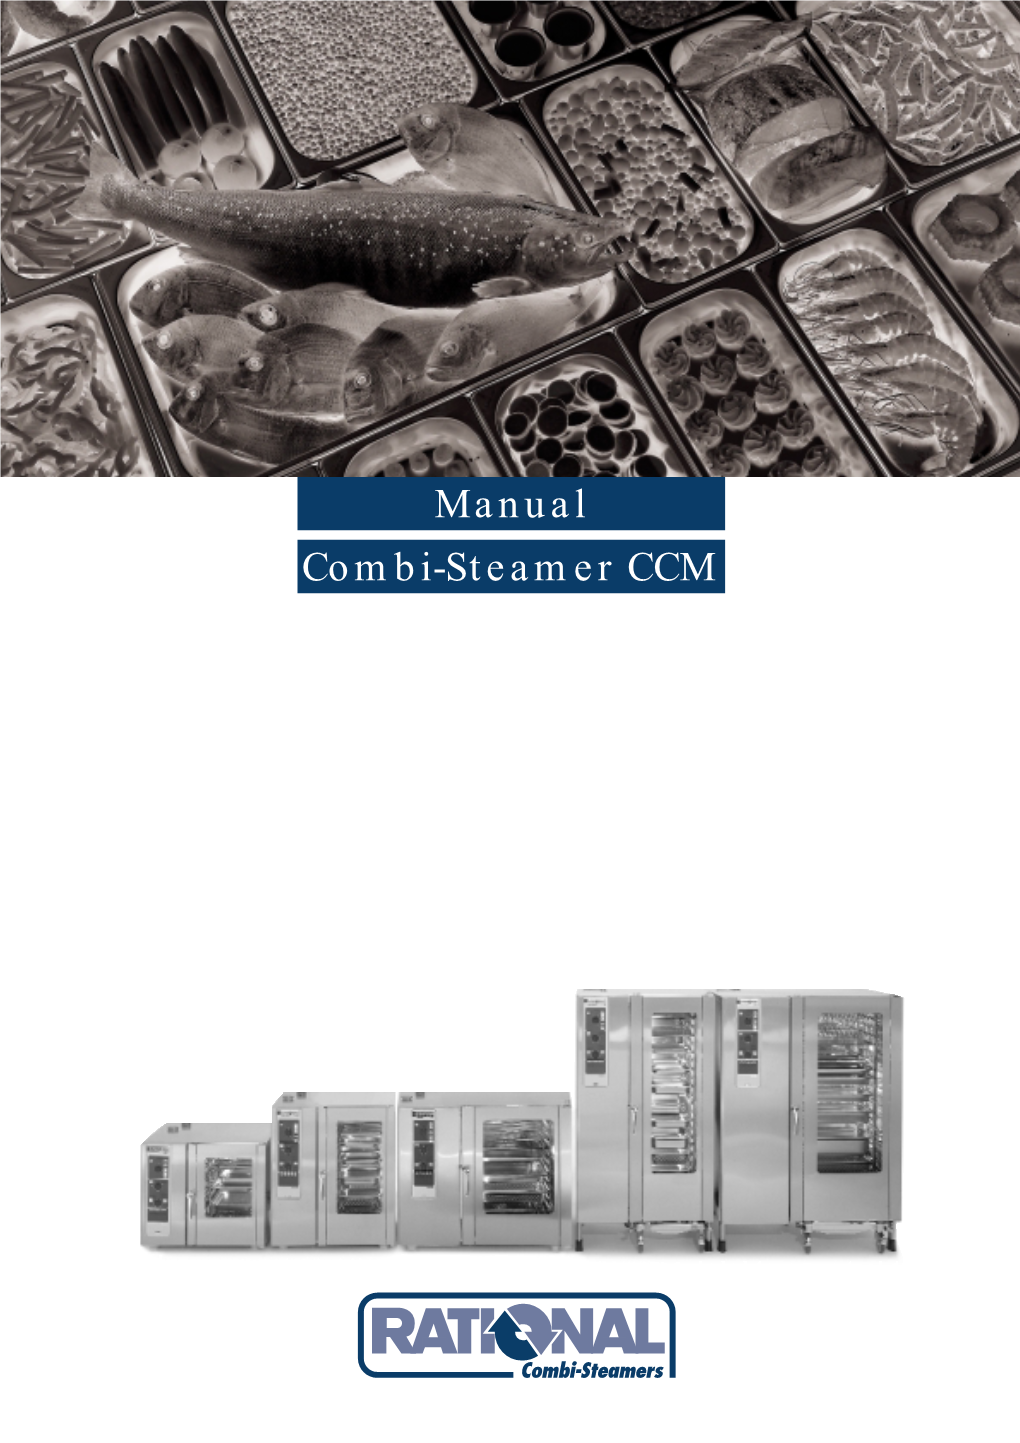 Manual Combi-Steamer CCM Your Customer Service